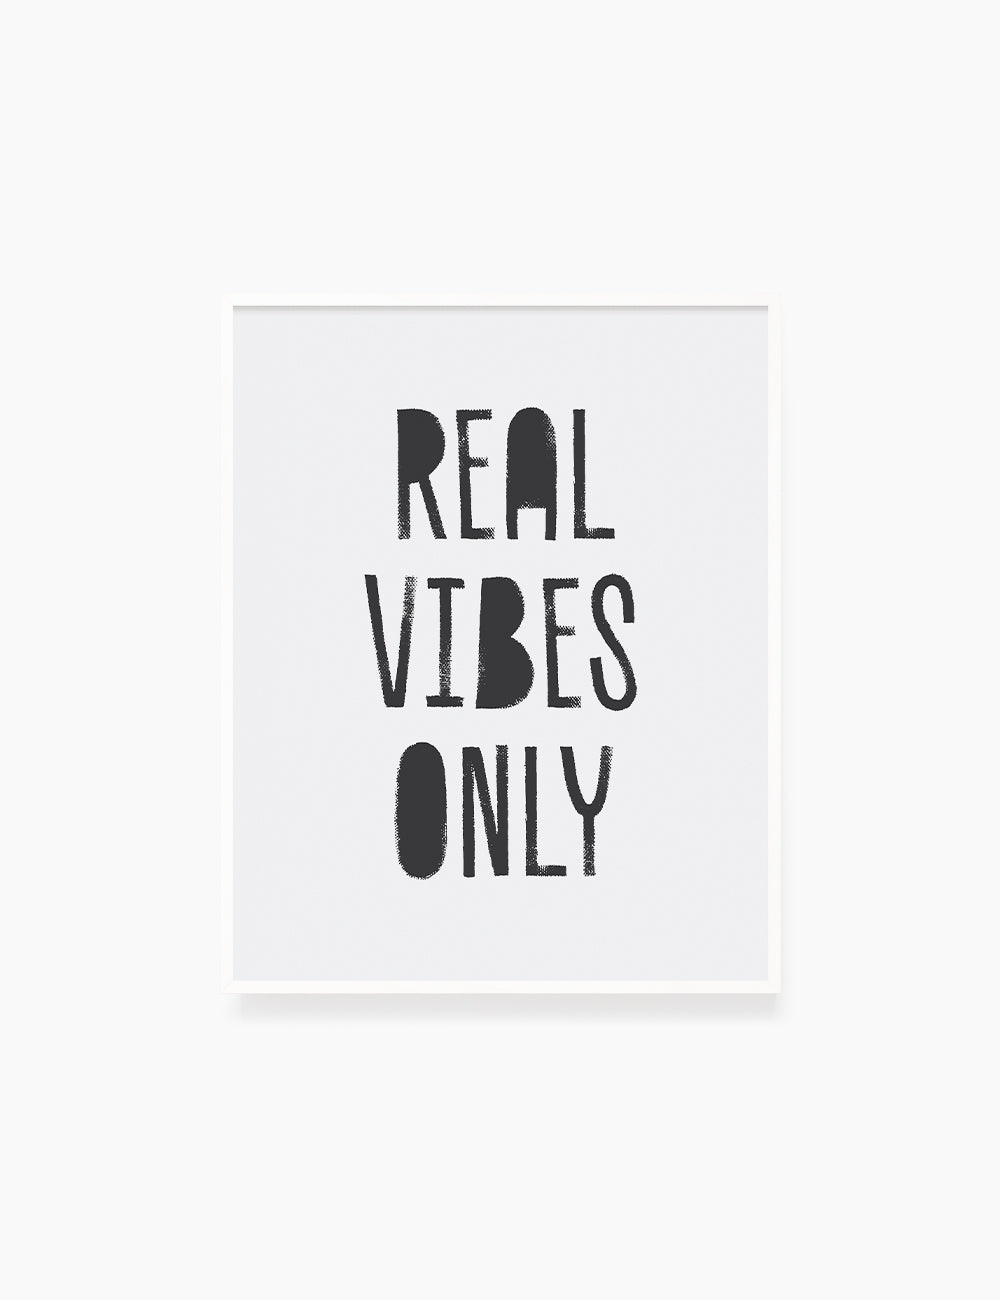 REAL VIBES ONLY. Authenticity Quote. Printable Poster. Printable Wall Art Quote. - PAPER MOON Art & Design